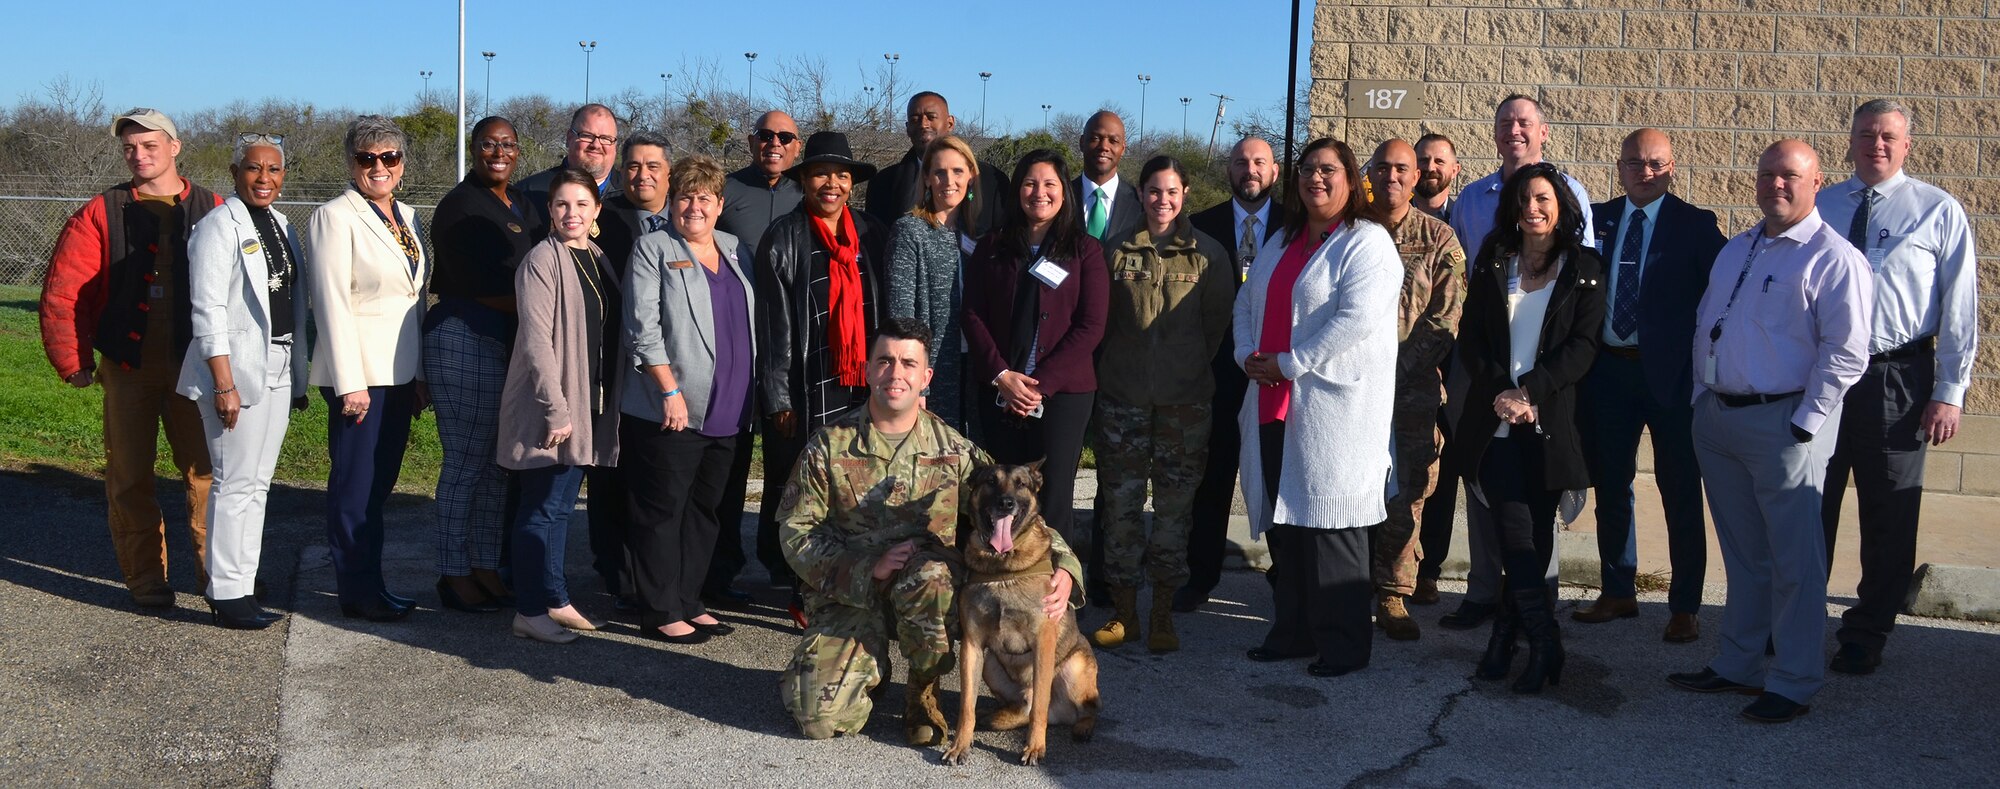 Military working dog Tarzan and his handler, Staff Sgt. Sean Tucker of the 802nd Security Forces Squadron, pose with a group of area school superintendents and administrators at Joint Base San Antonio-Lackland Annex Jan. 23. The group of 15 school superintendents and administrators, who were on a tour of JBSA-Lackland, got to see Tarzan perform in a military working dog demonstration.